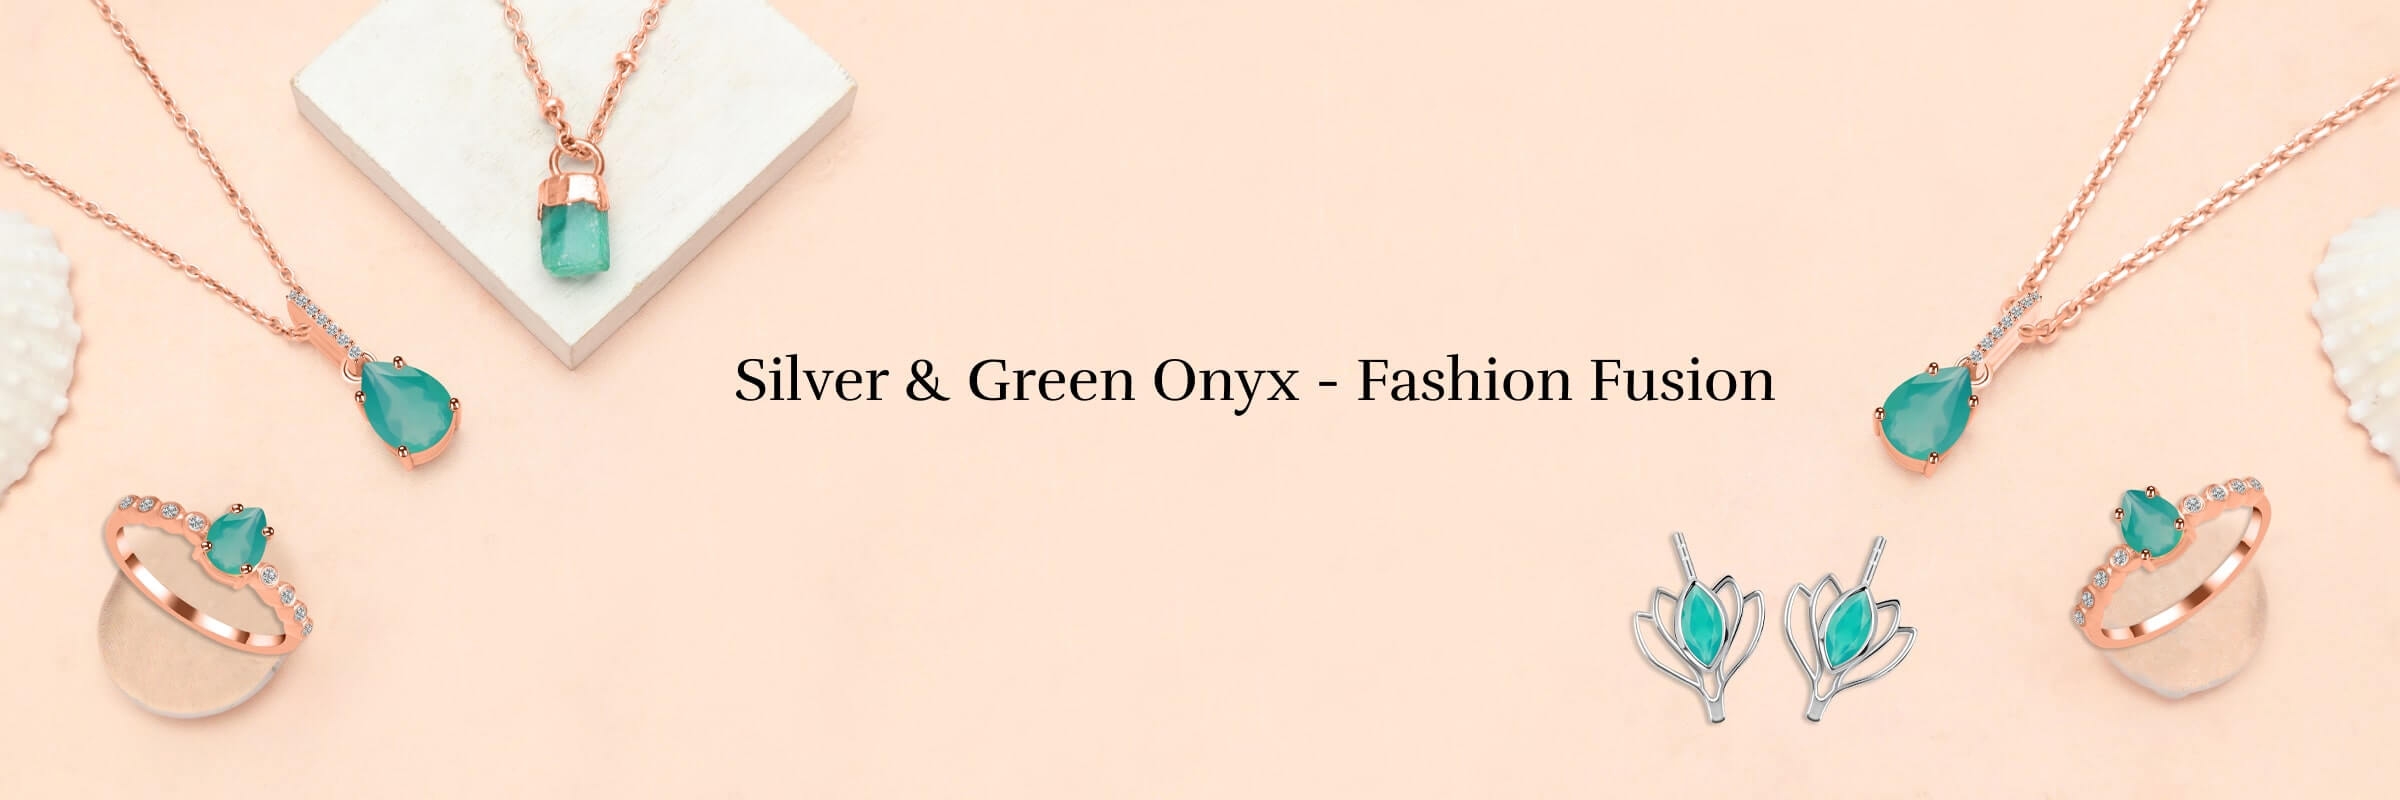 How to Wear Green Onyx Sterling Silver Jewelry